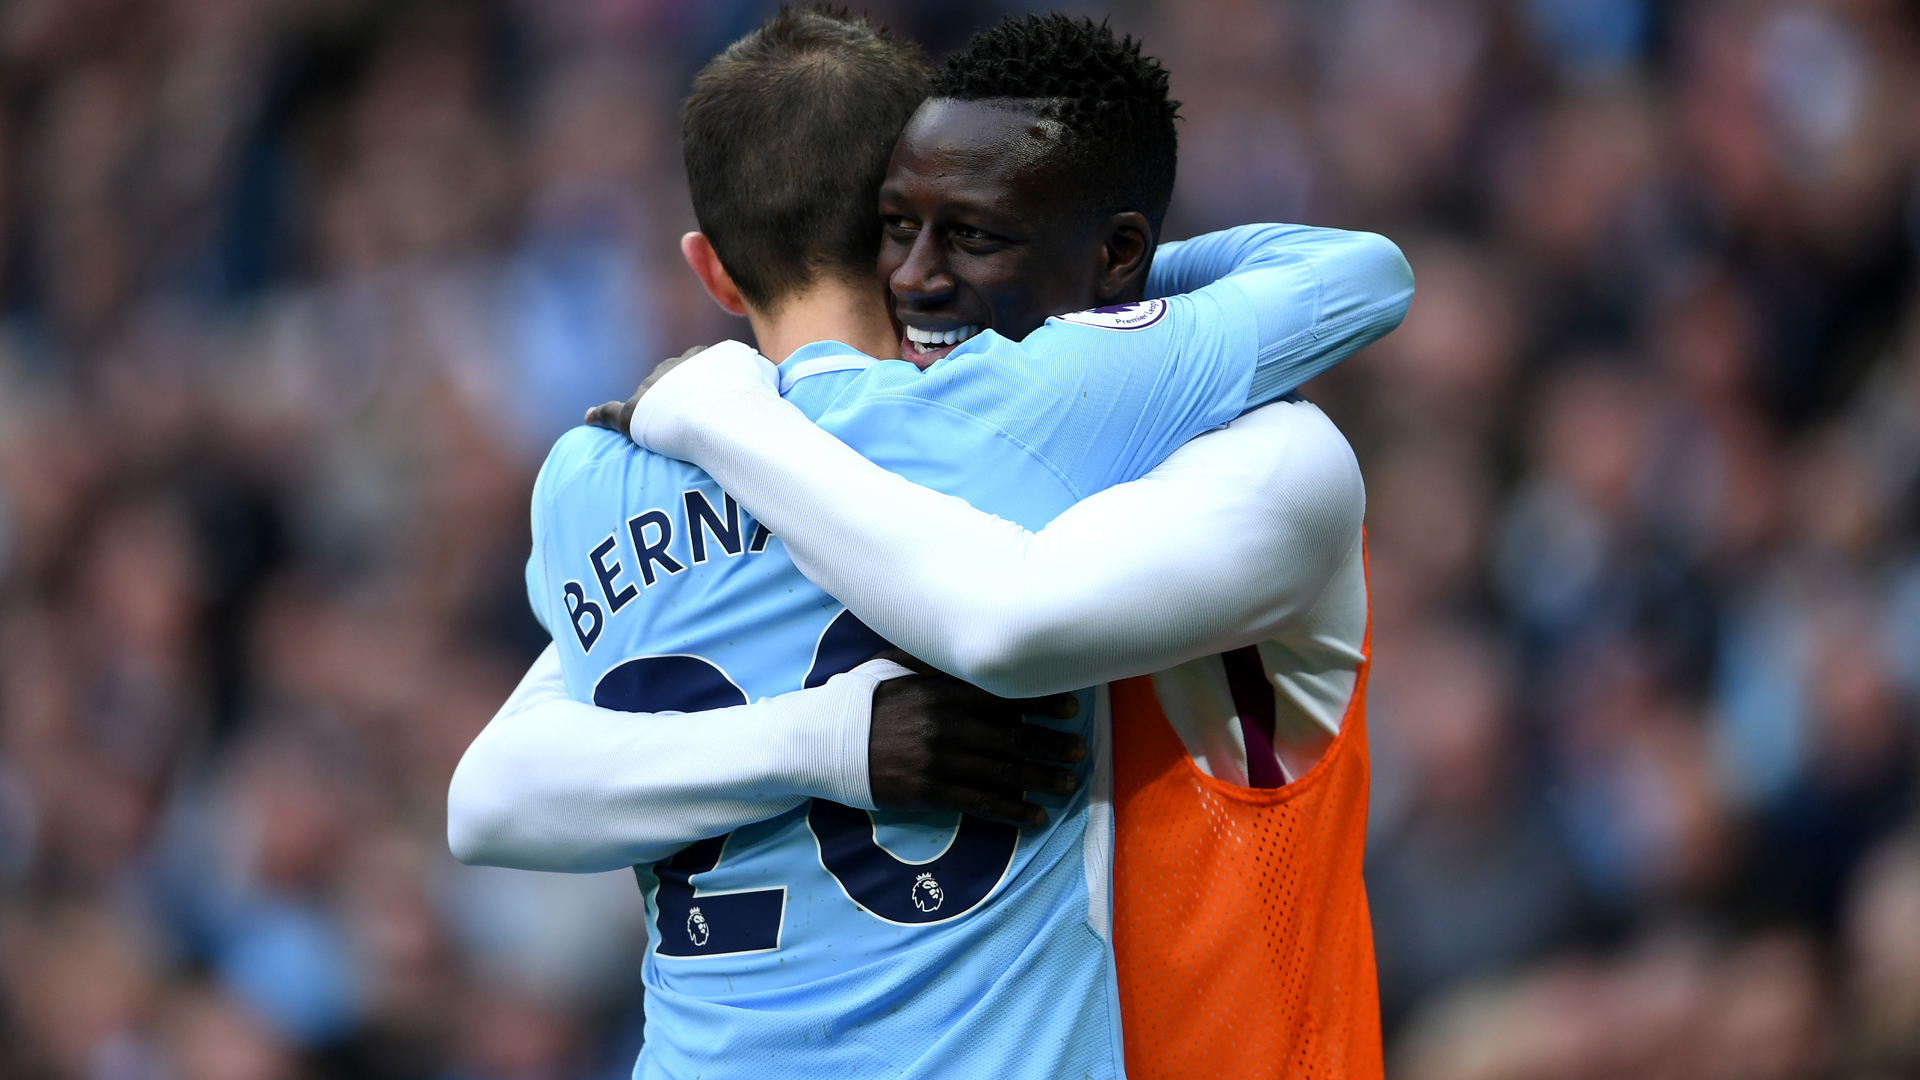 MANCHESTER, ENGLAND - APRIL 22:  Bernardo Silva of Manchester City celebrates scoring his side's fourth goal with Benjamin Mendy during the Premier League match between Manchester City and Swansea City at Etihad Stadium on April 22, 2018 in Manchester, England.  (Photo by Laurence Griffiths/Getty Images)